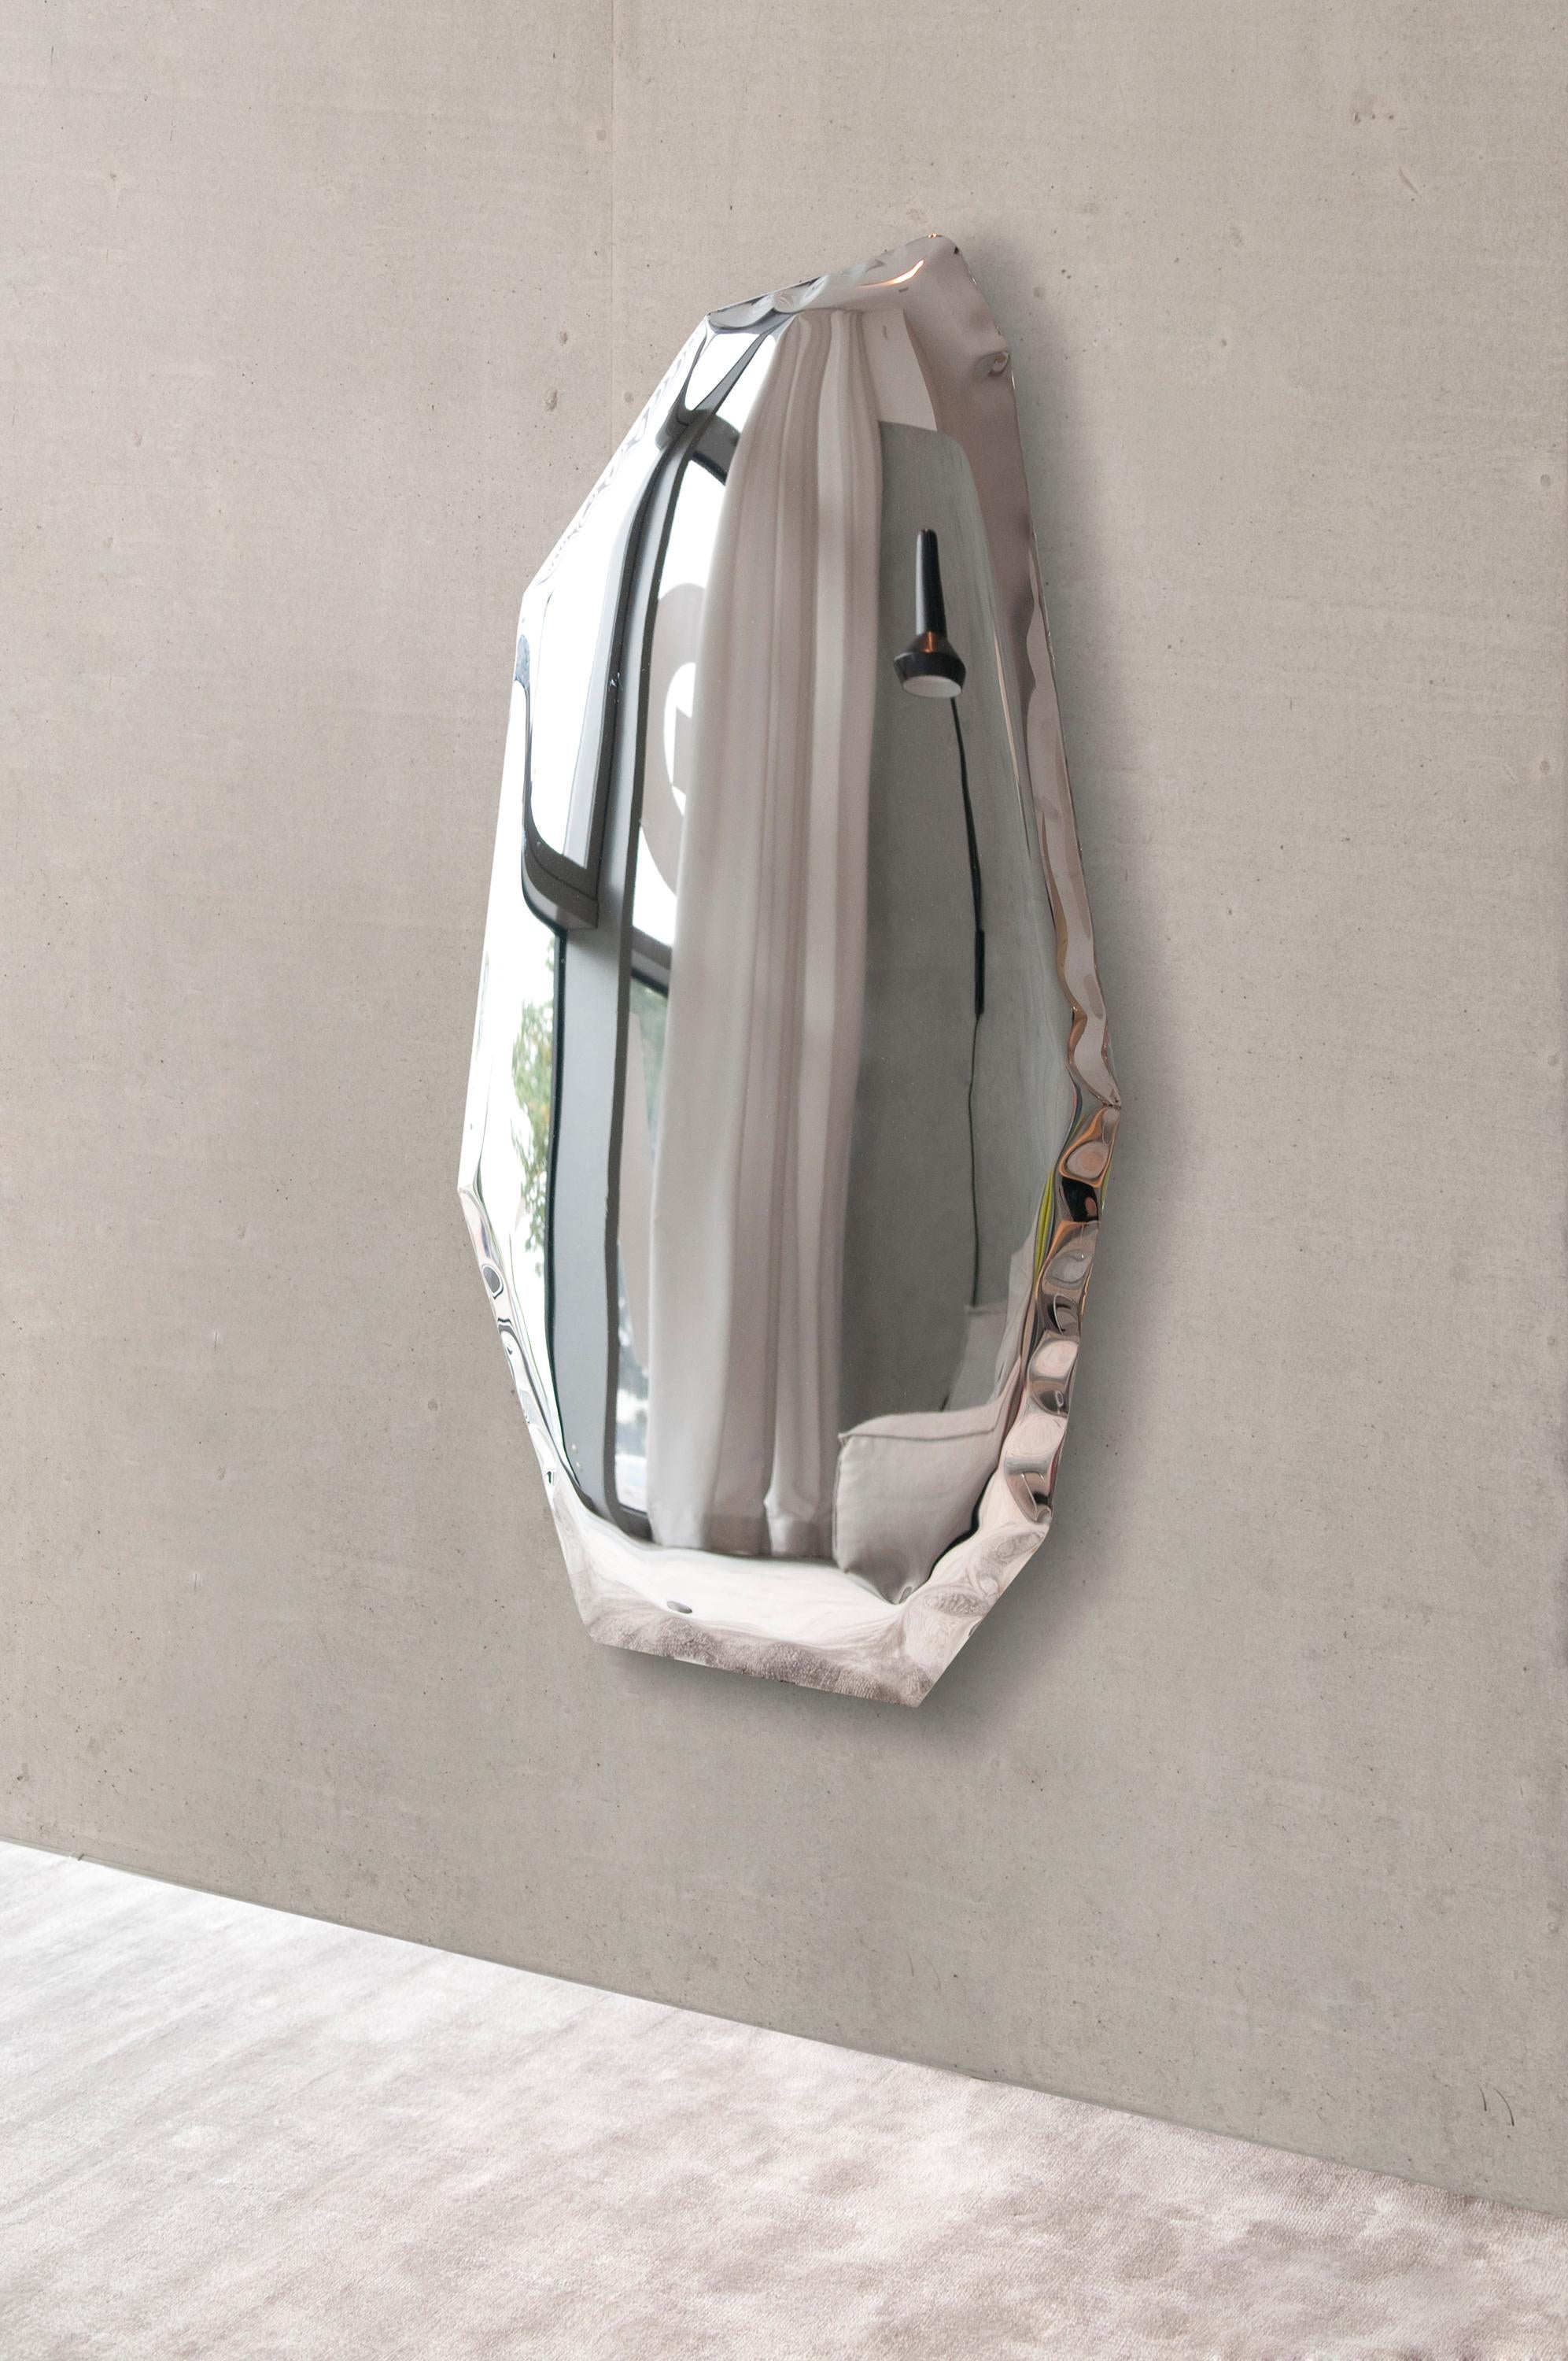 Stainless Steel Tafla C1 Sculptural Wall Mirror by Zieta For Sale 1